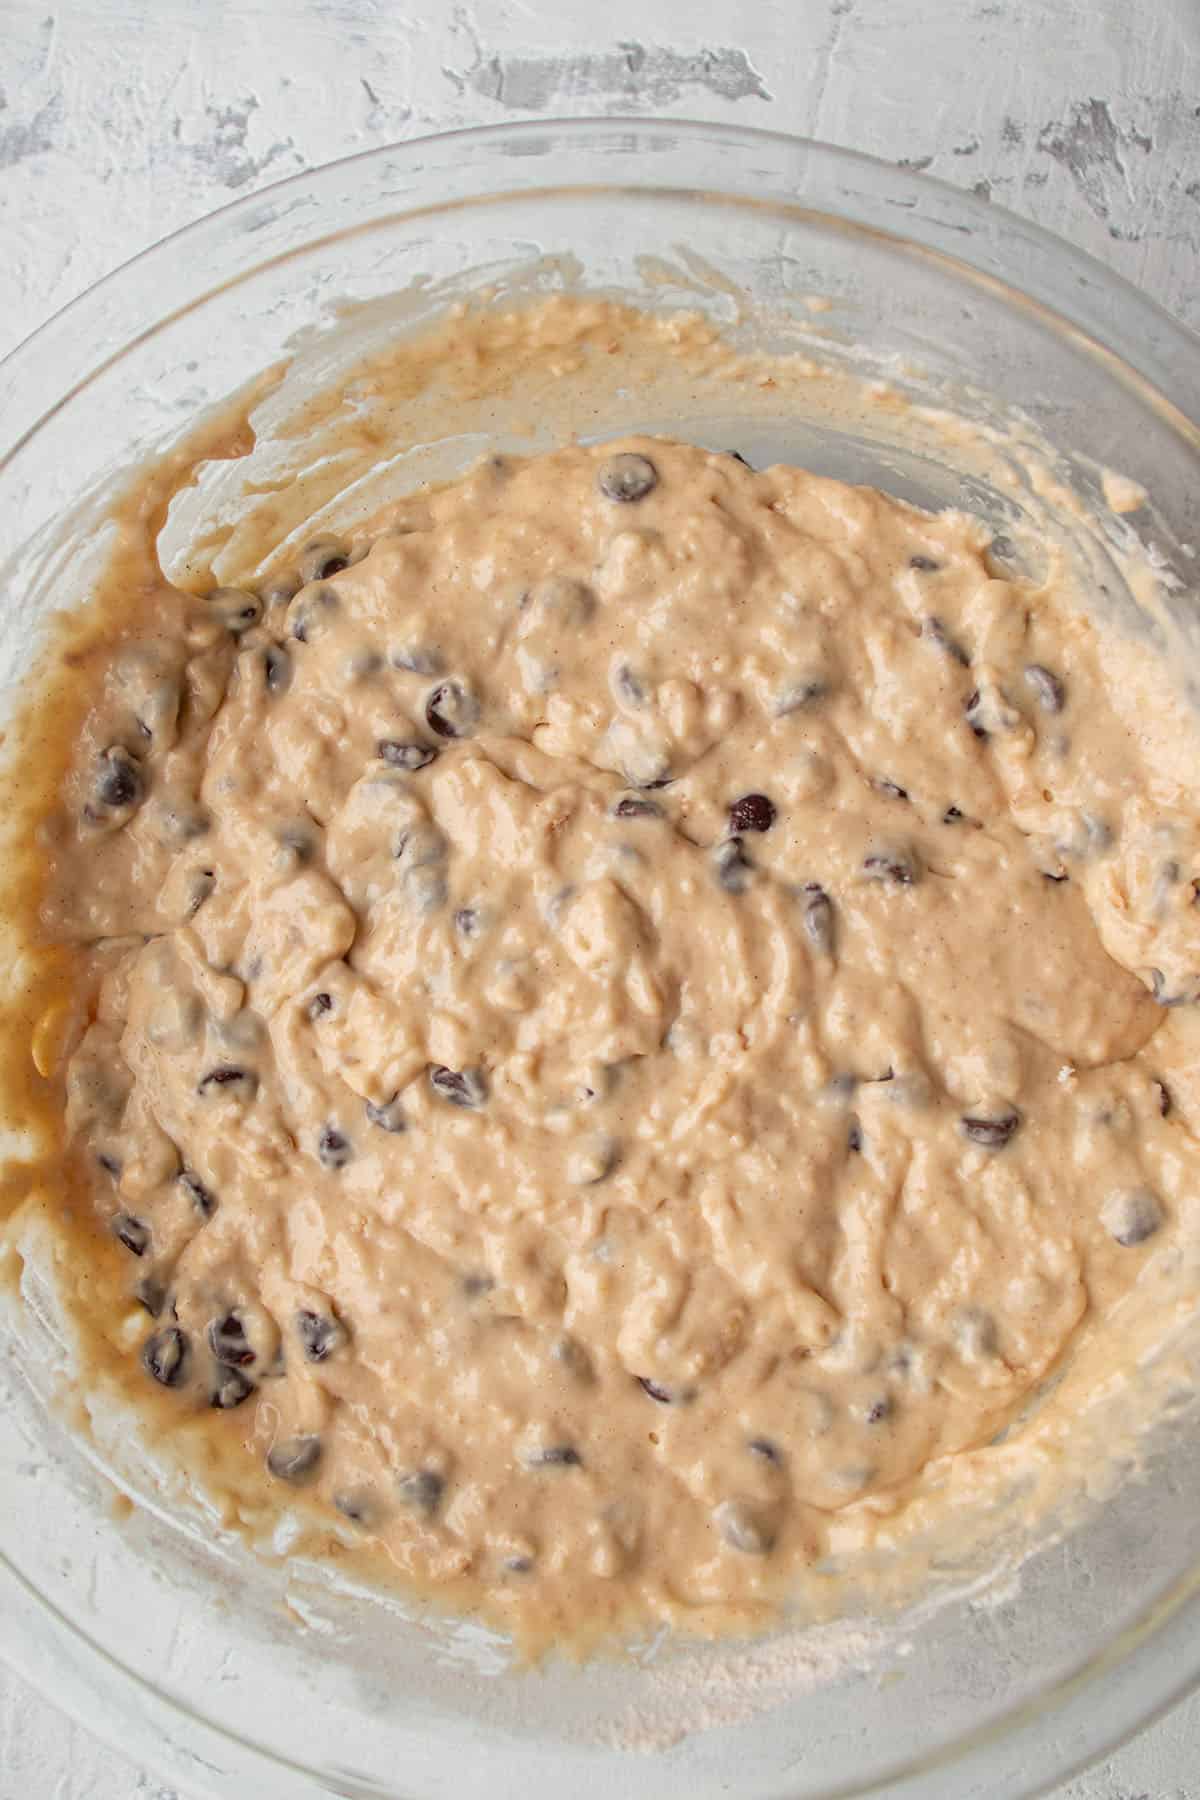 A large glass bowl with a batter that has chocolate chips inside.